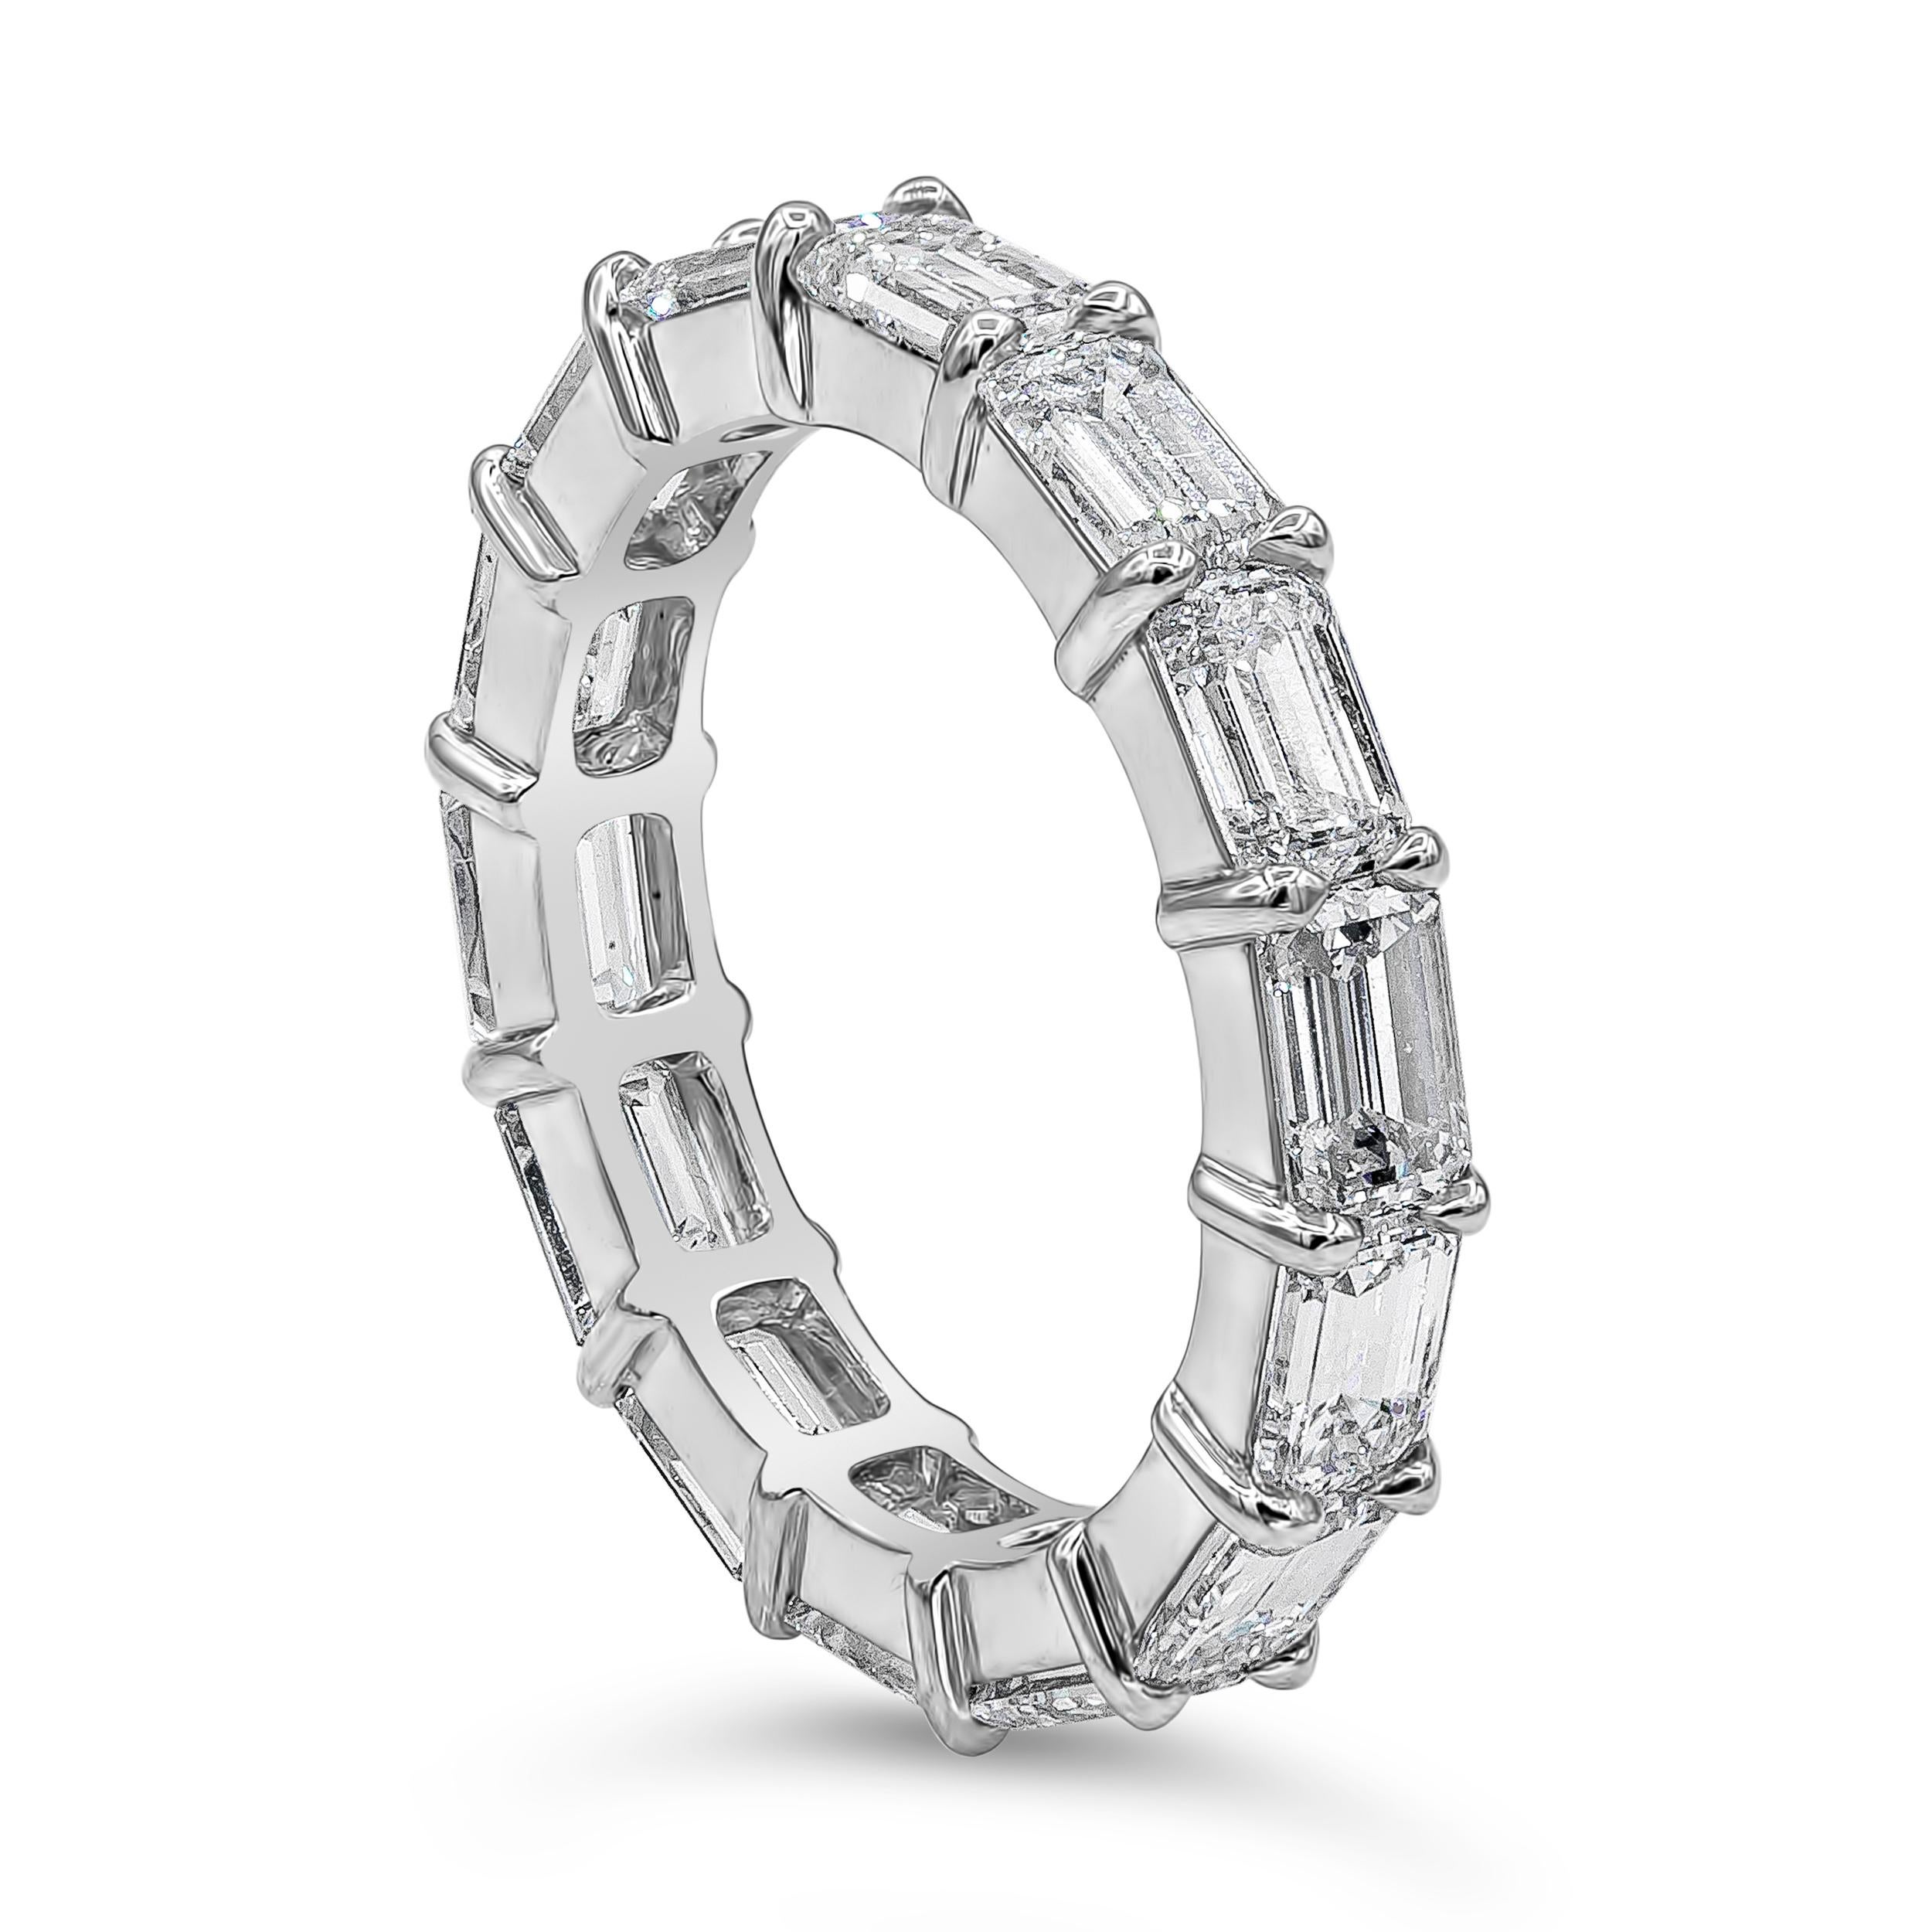 A chic and stylish eternity wedding band showcasing 4.35 carats of emerald cut diamonds, E Color and Vs in Clarity. Set east to west in a horizontal fashion. Made with Platinum. Size 6.5 US resizable upon request.

Roman Malakov is a custom house,